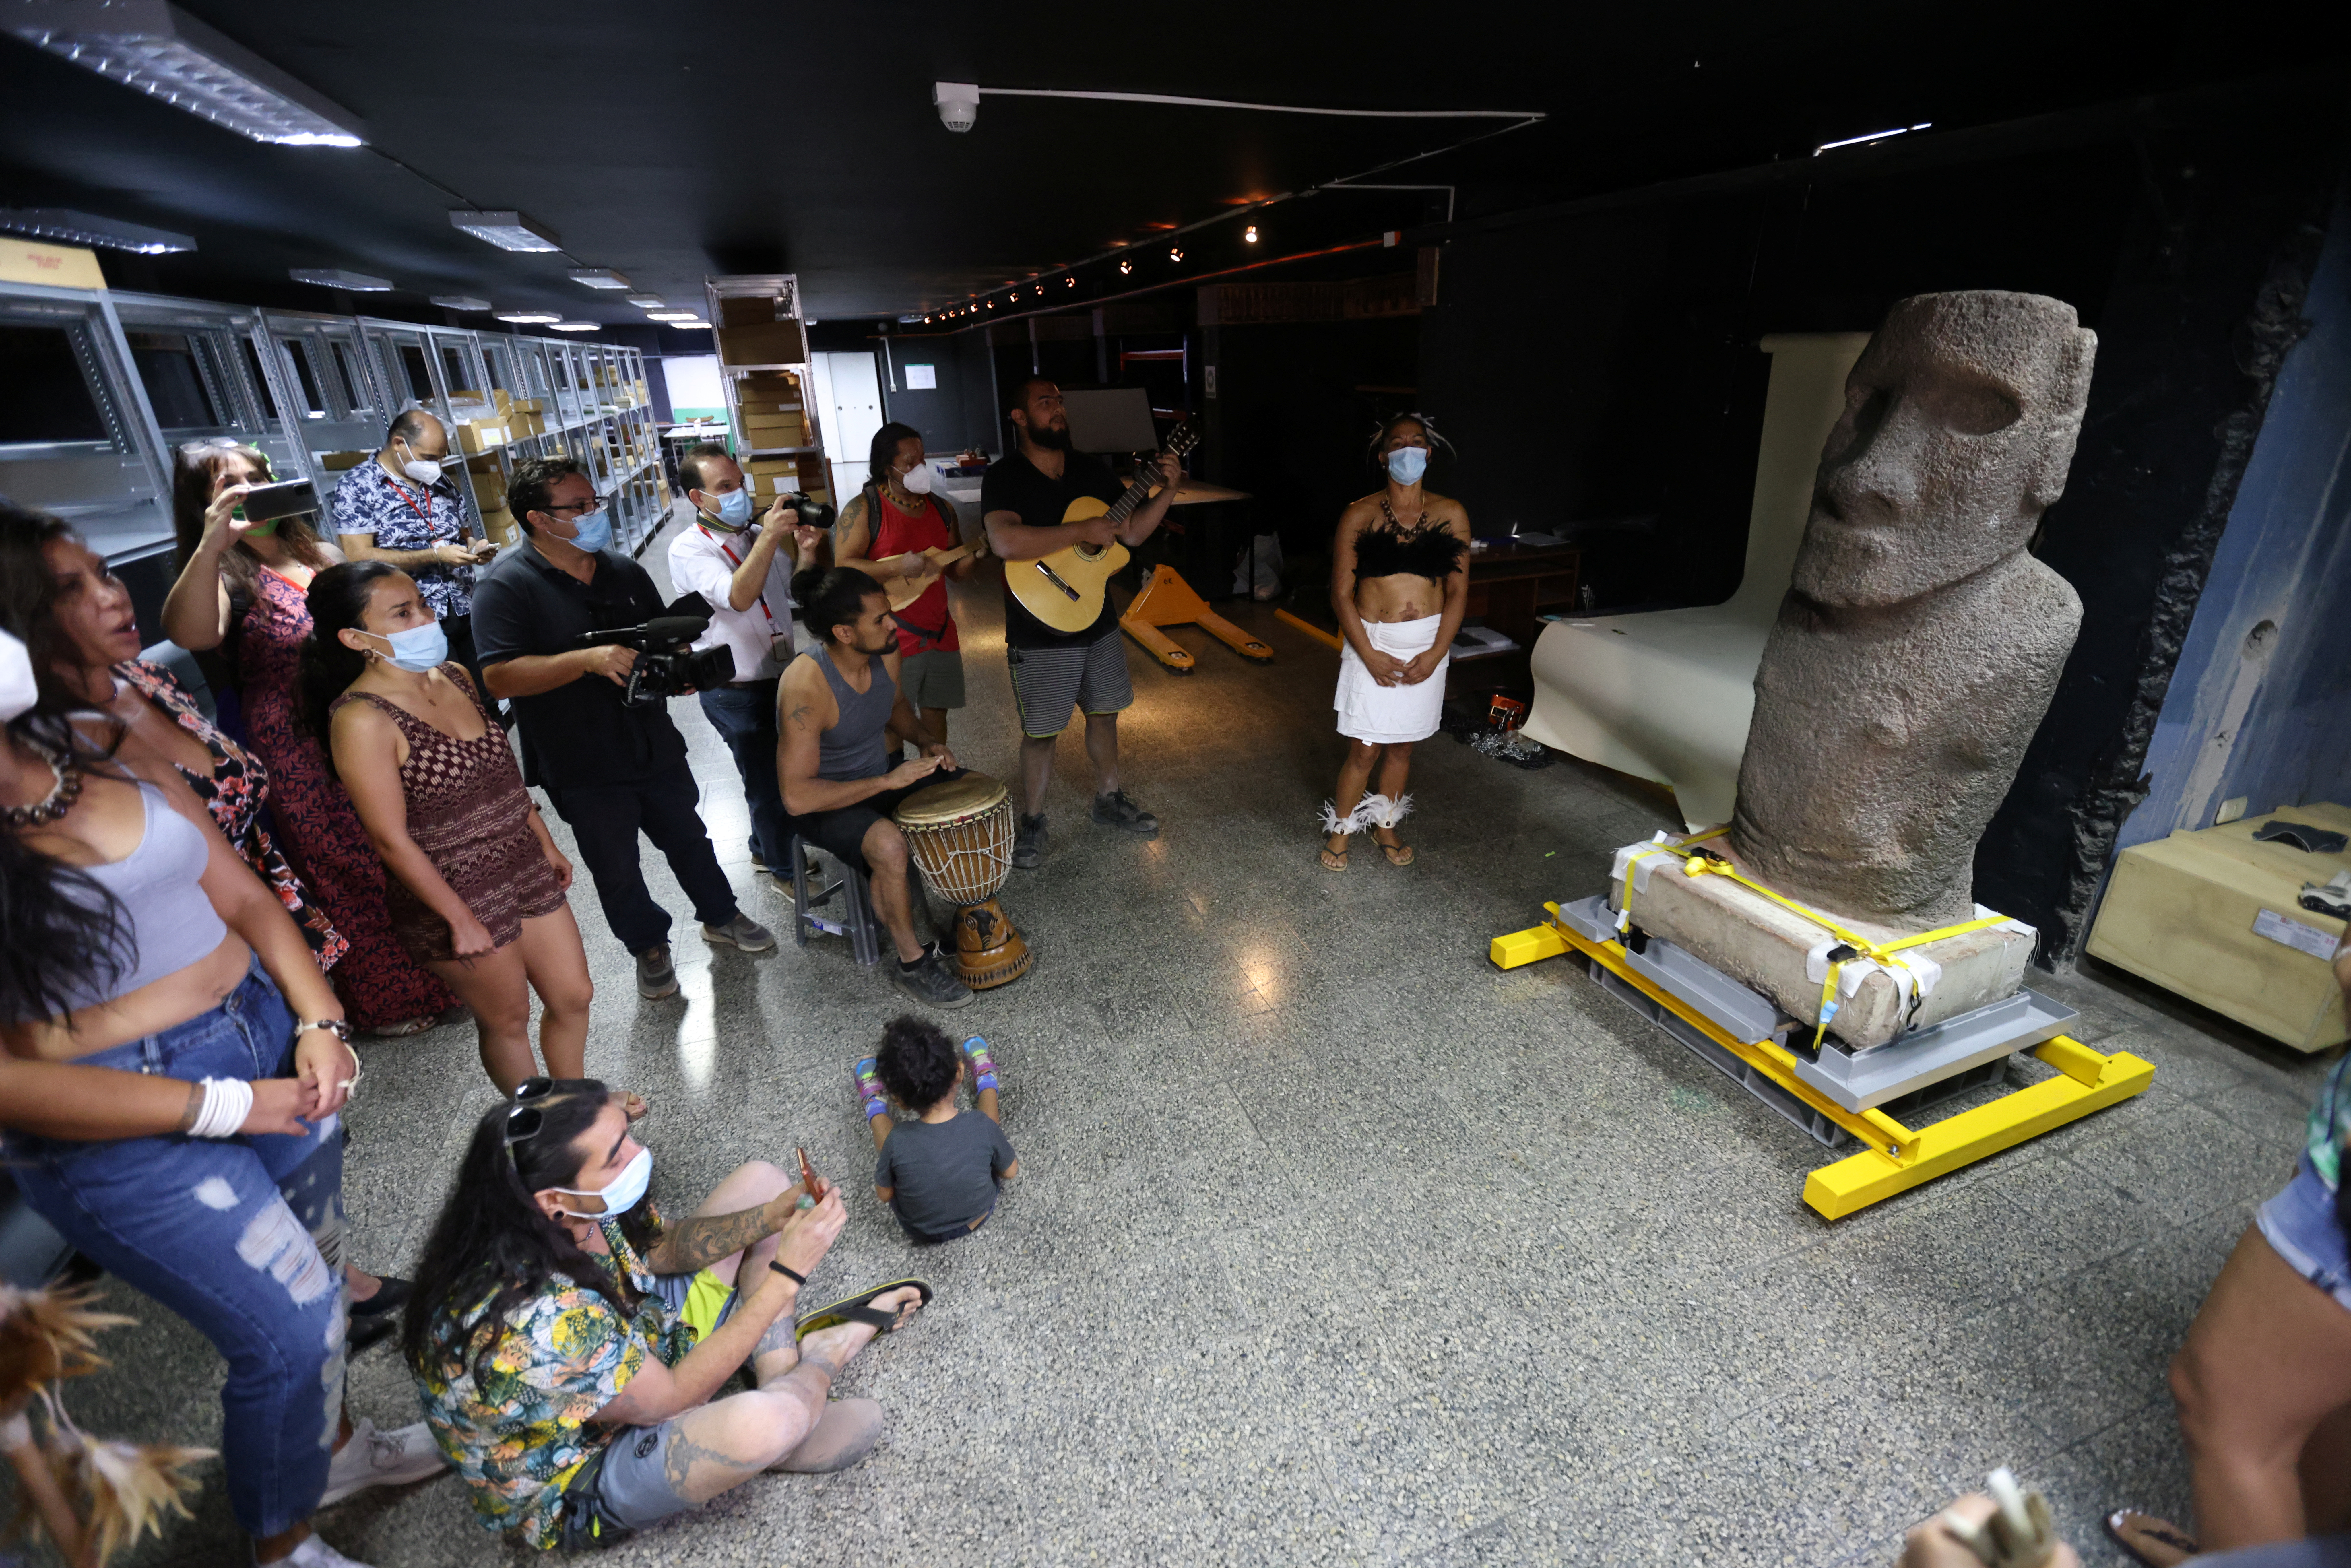 Easter Island Moai statue heads back home after museum stay, in Santiago